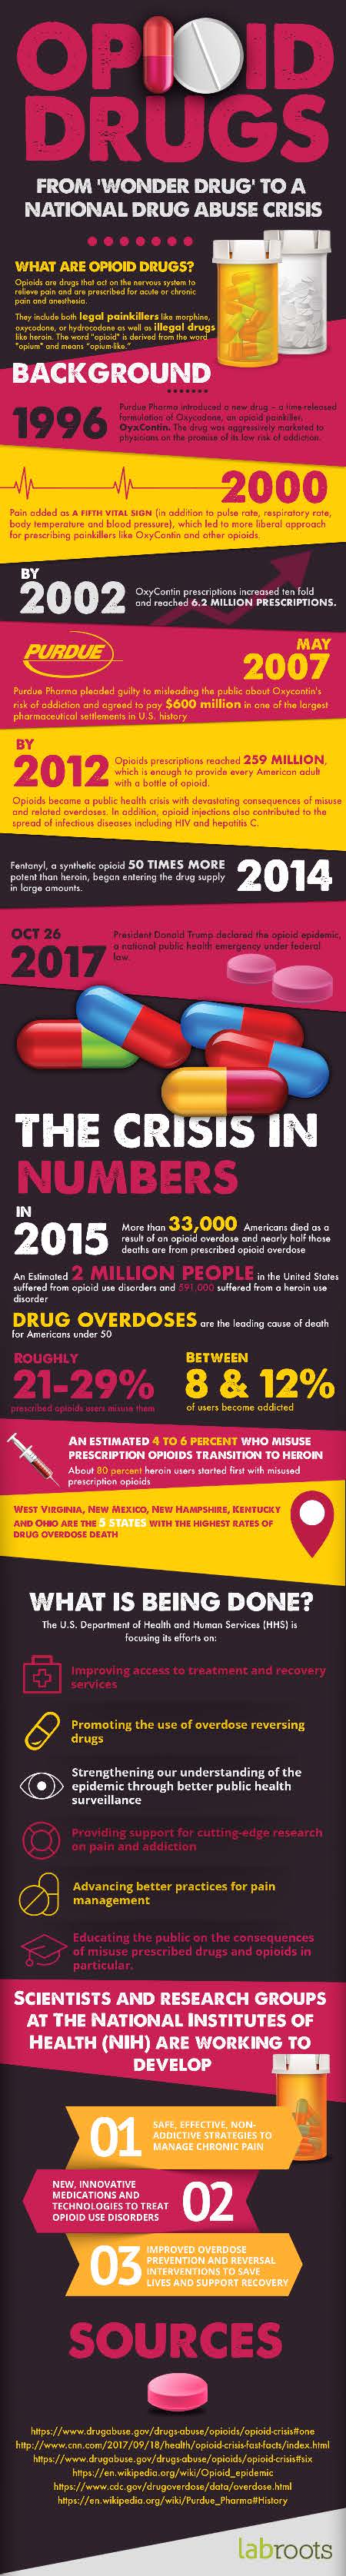 Opioid Drugs - From 'Wonder Drug' To A National Drug Abuse Crisis